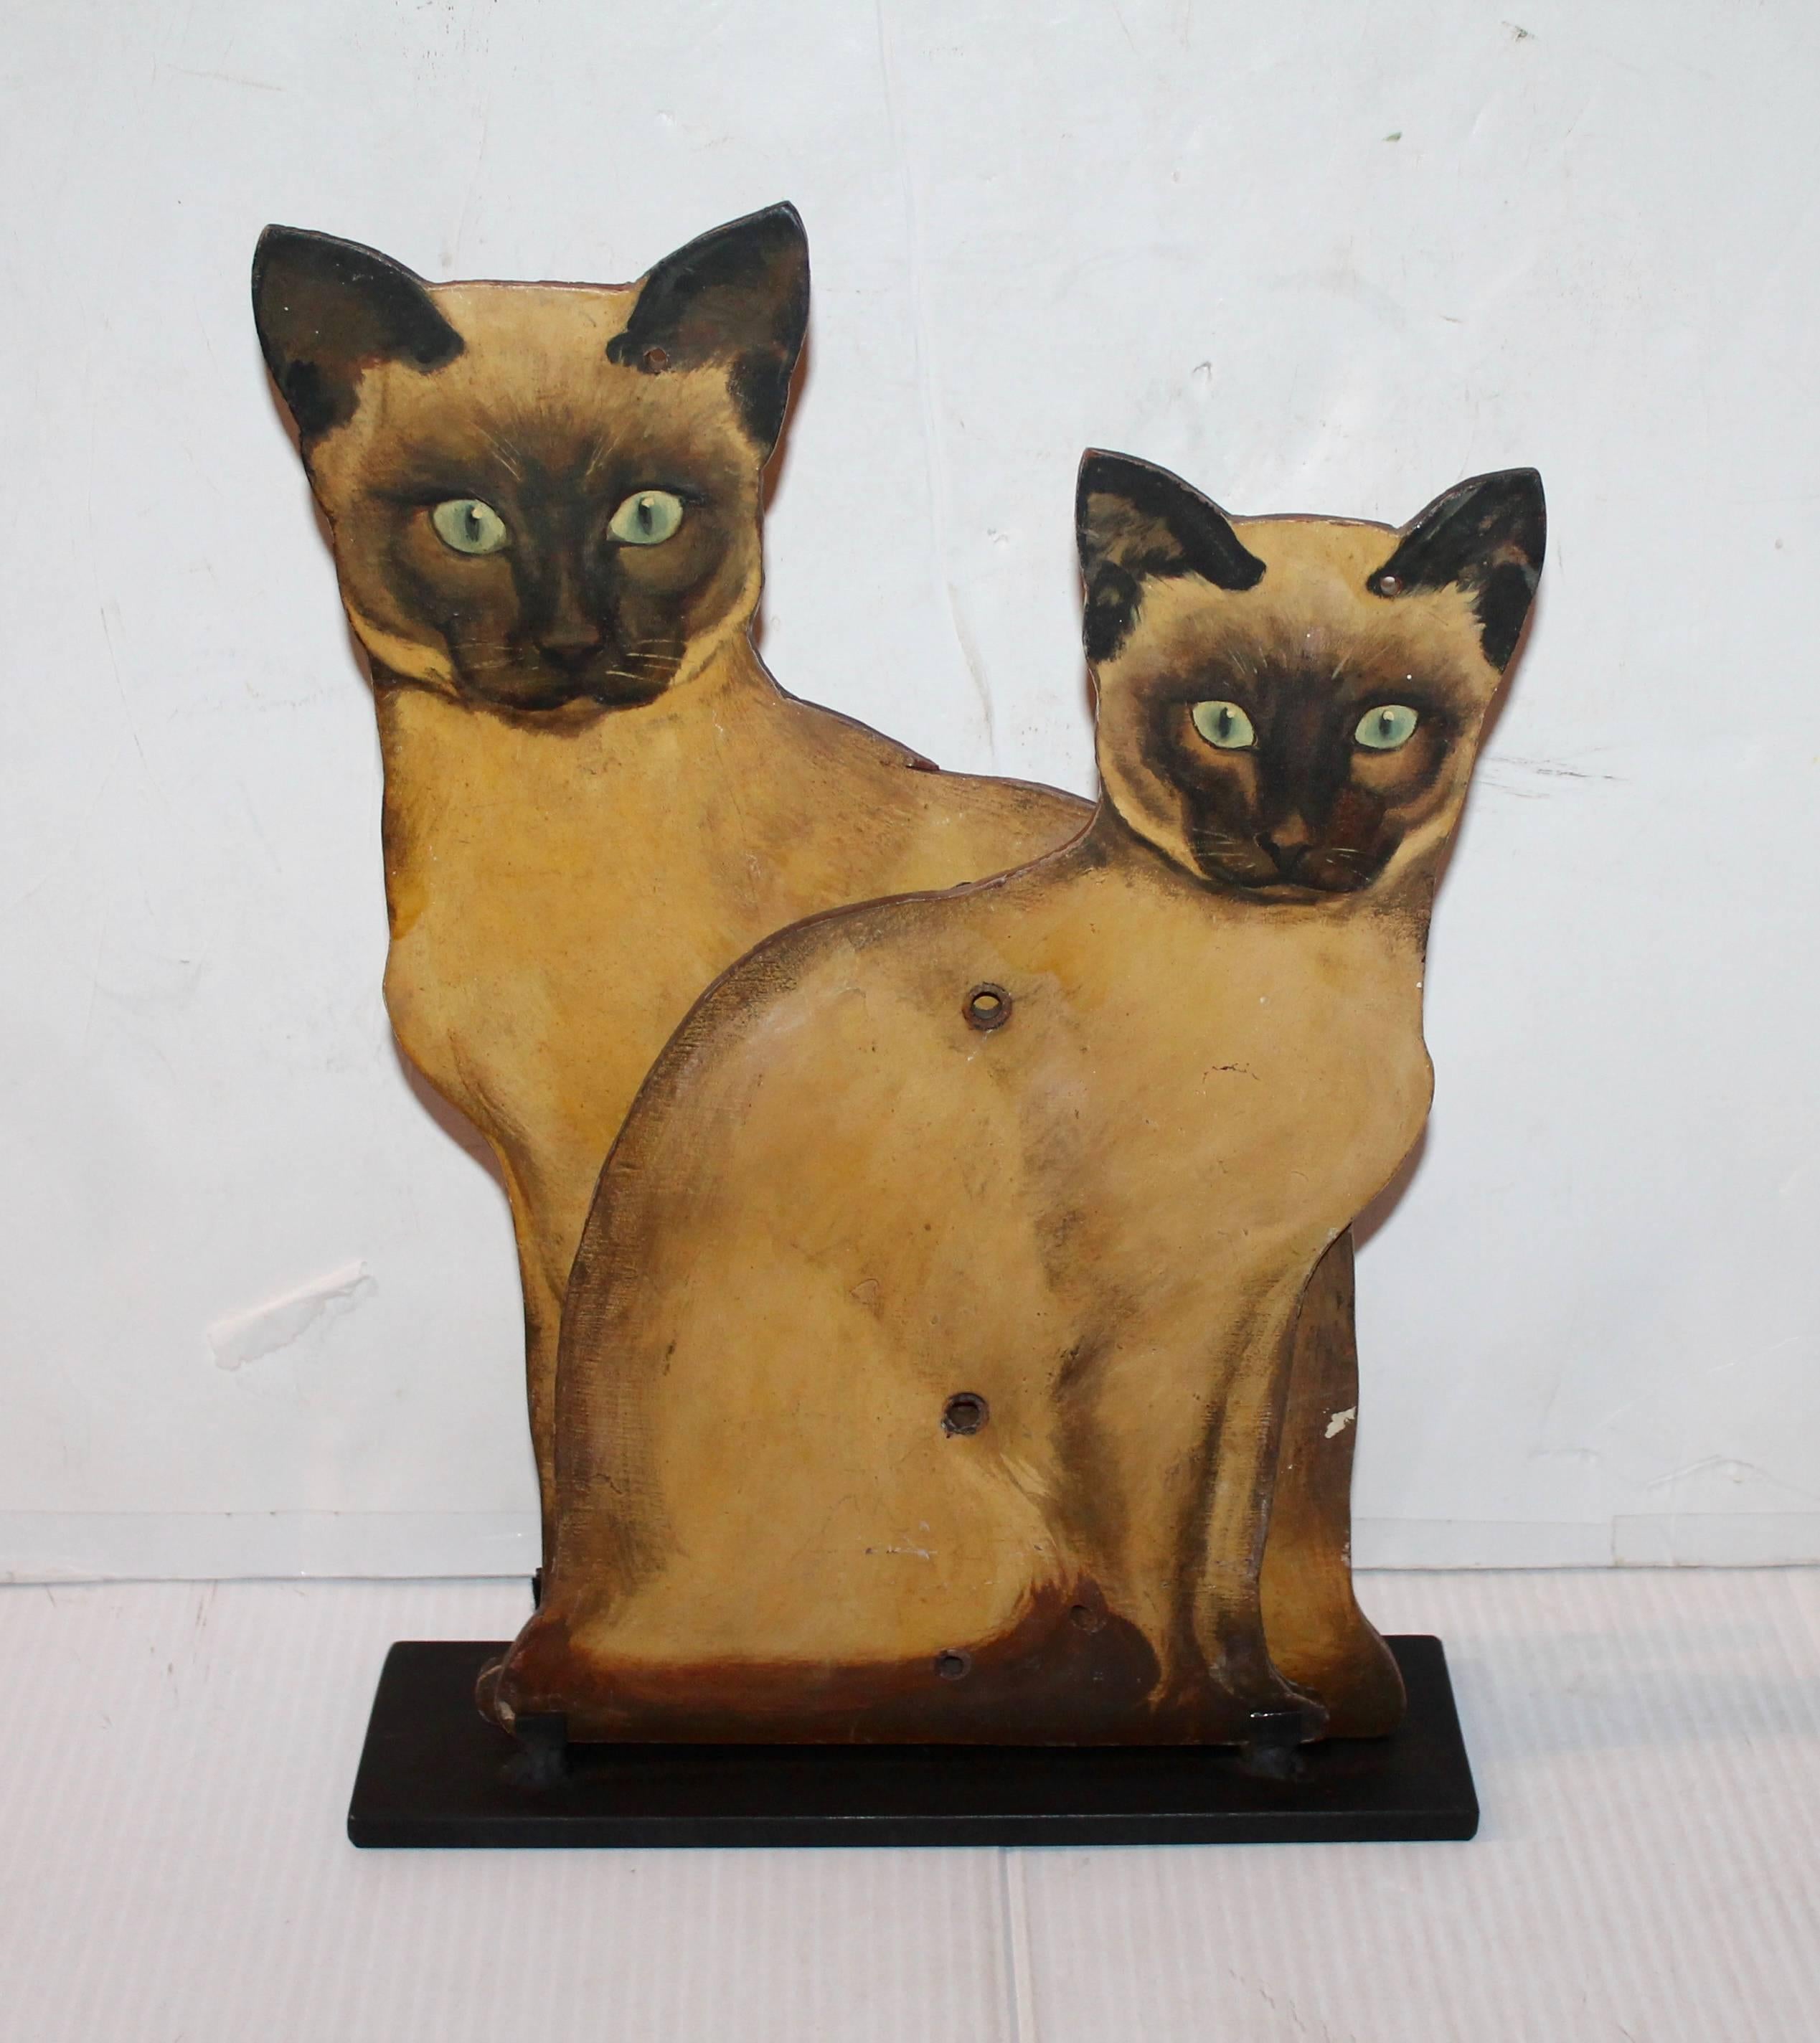 These folk handmade and painted cats are on wood and can intersect together. One cat is larger then the other and both are different. Could be mounted on cast iron mounts for show. Large cat is 15